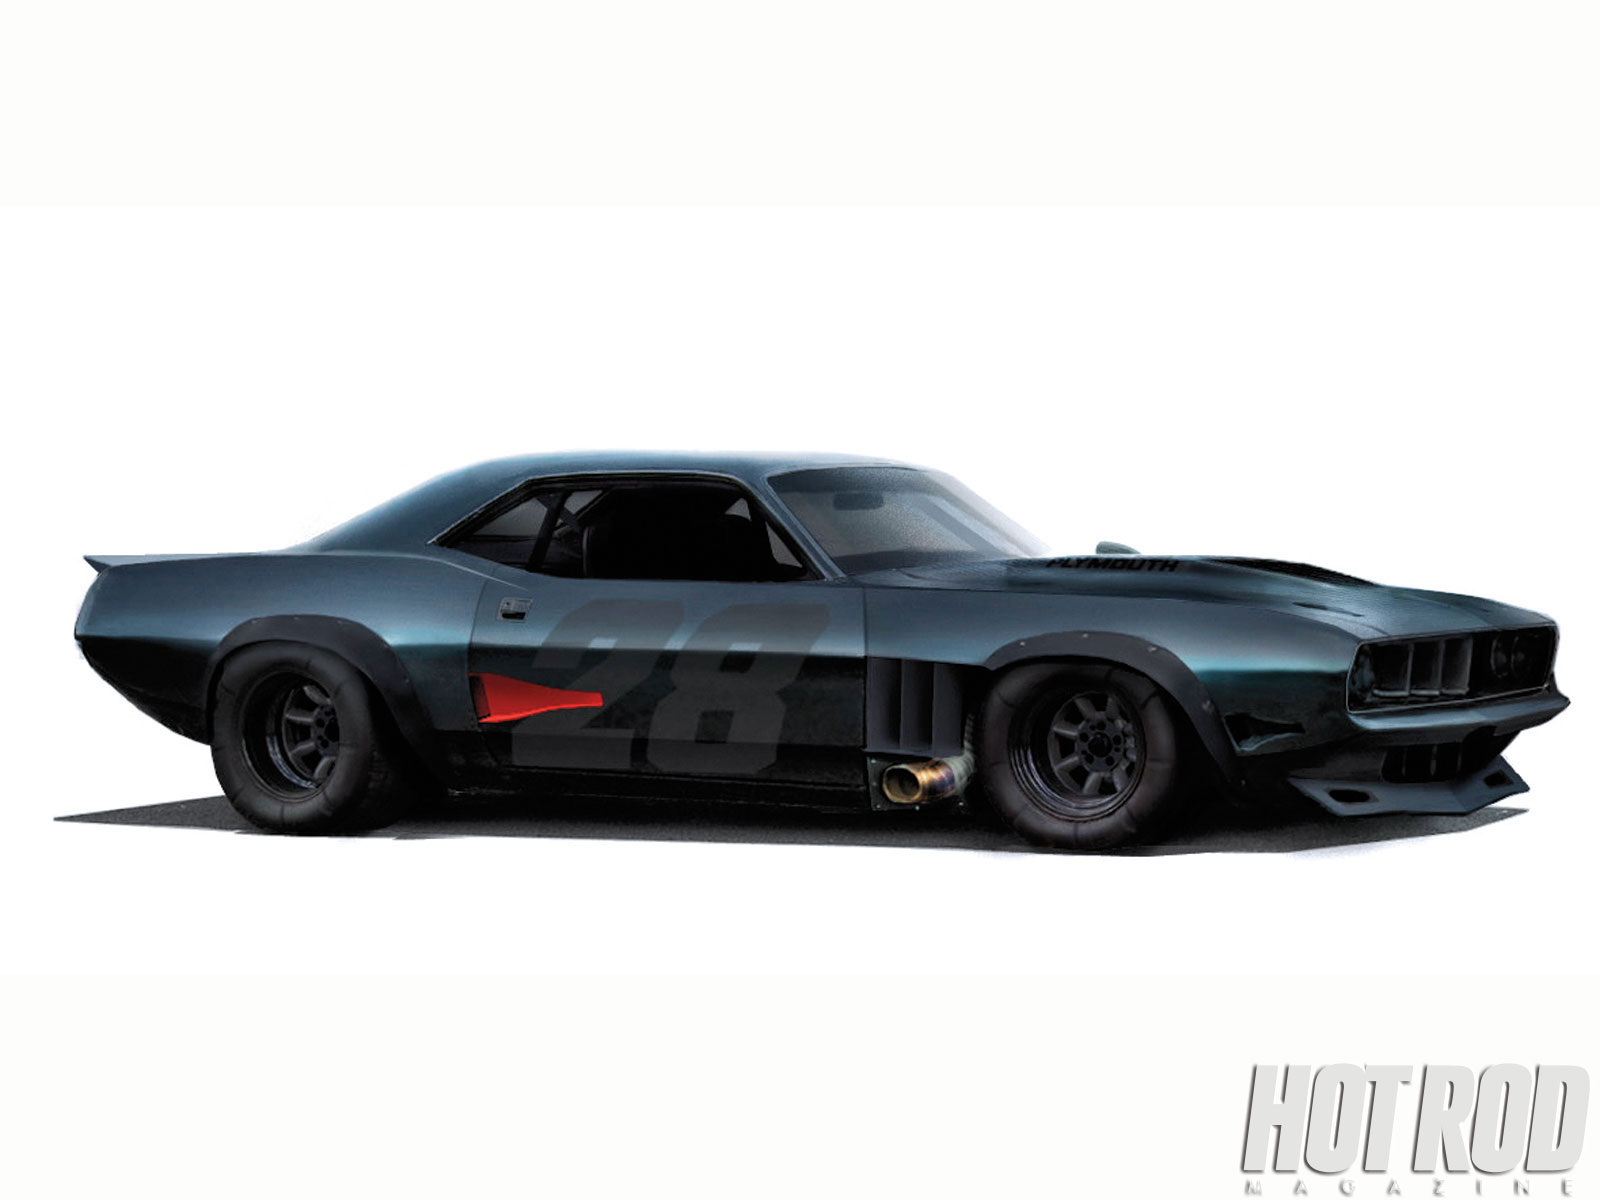 plymouth, Barracuda, Cuda, Muscle, Hot, Rod, Rods, Classic, Race, Racing, Gd Wallpaper